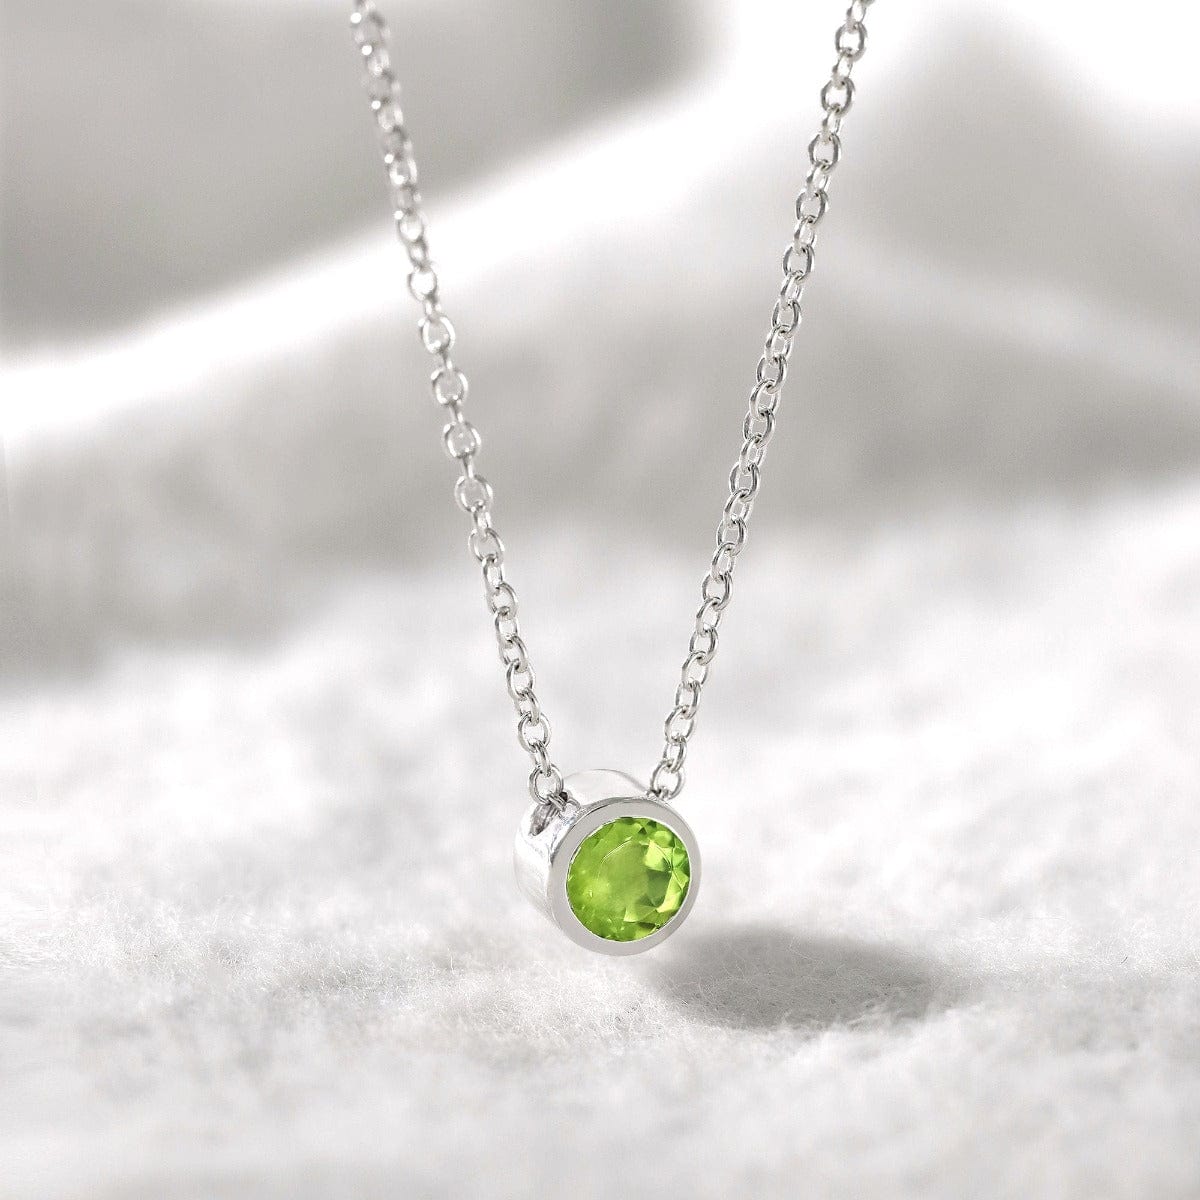 Boma Jewelry Necklaces Peridot Belle Solo Birthstone Pendant Necklace